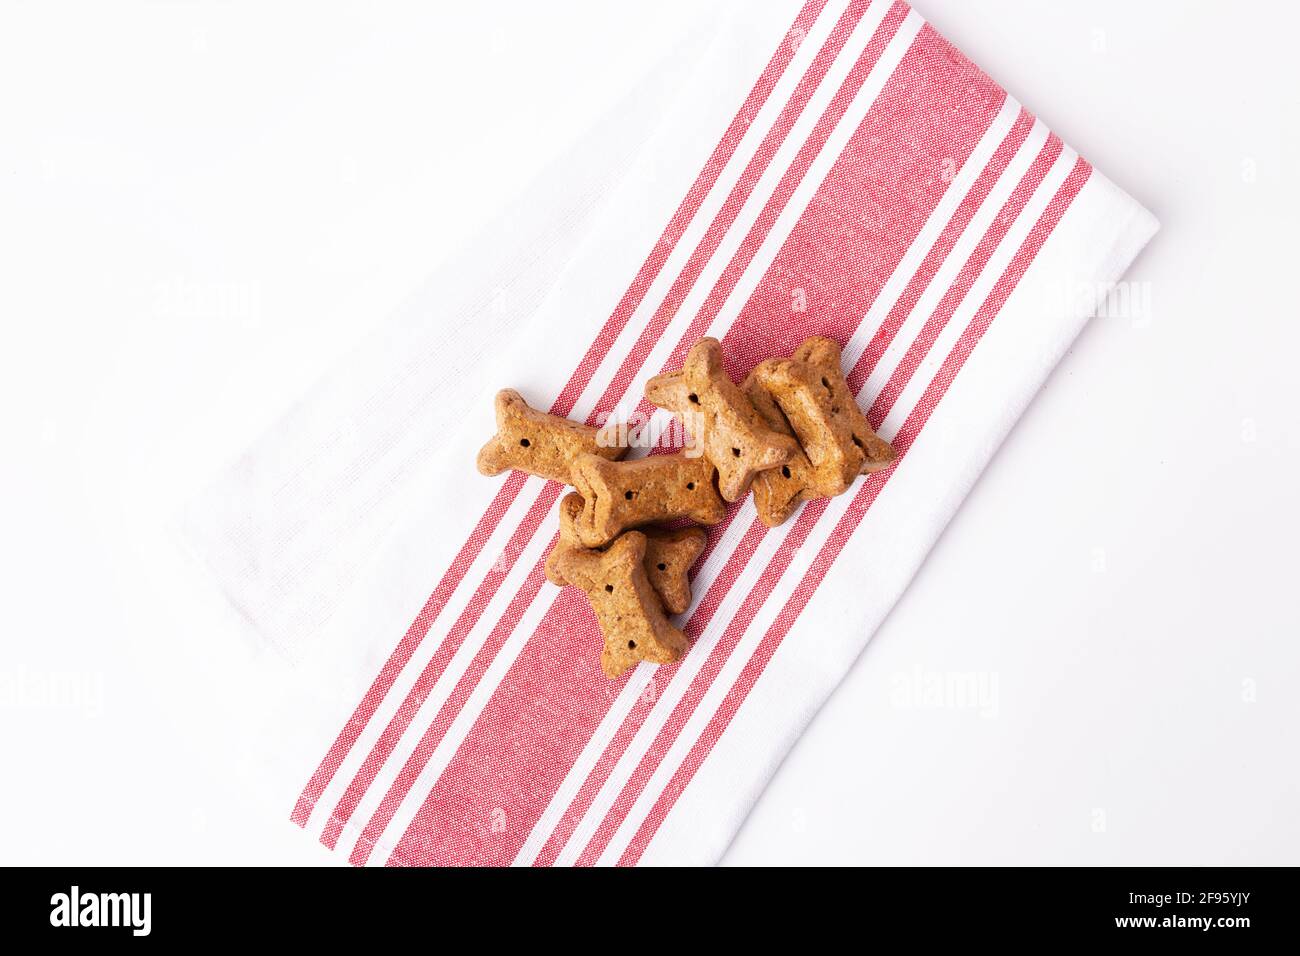 Top view of pile of brown dog biscuits on red and white kitchen towel Stock Photo